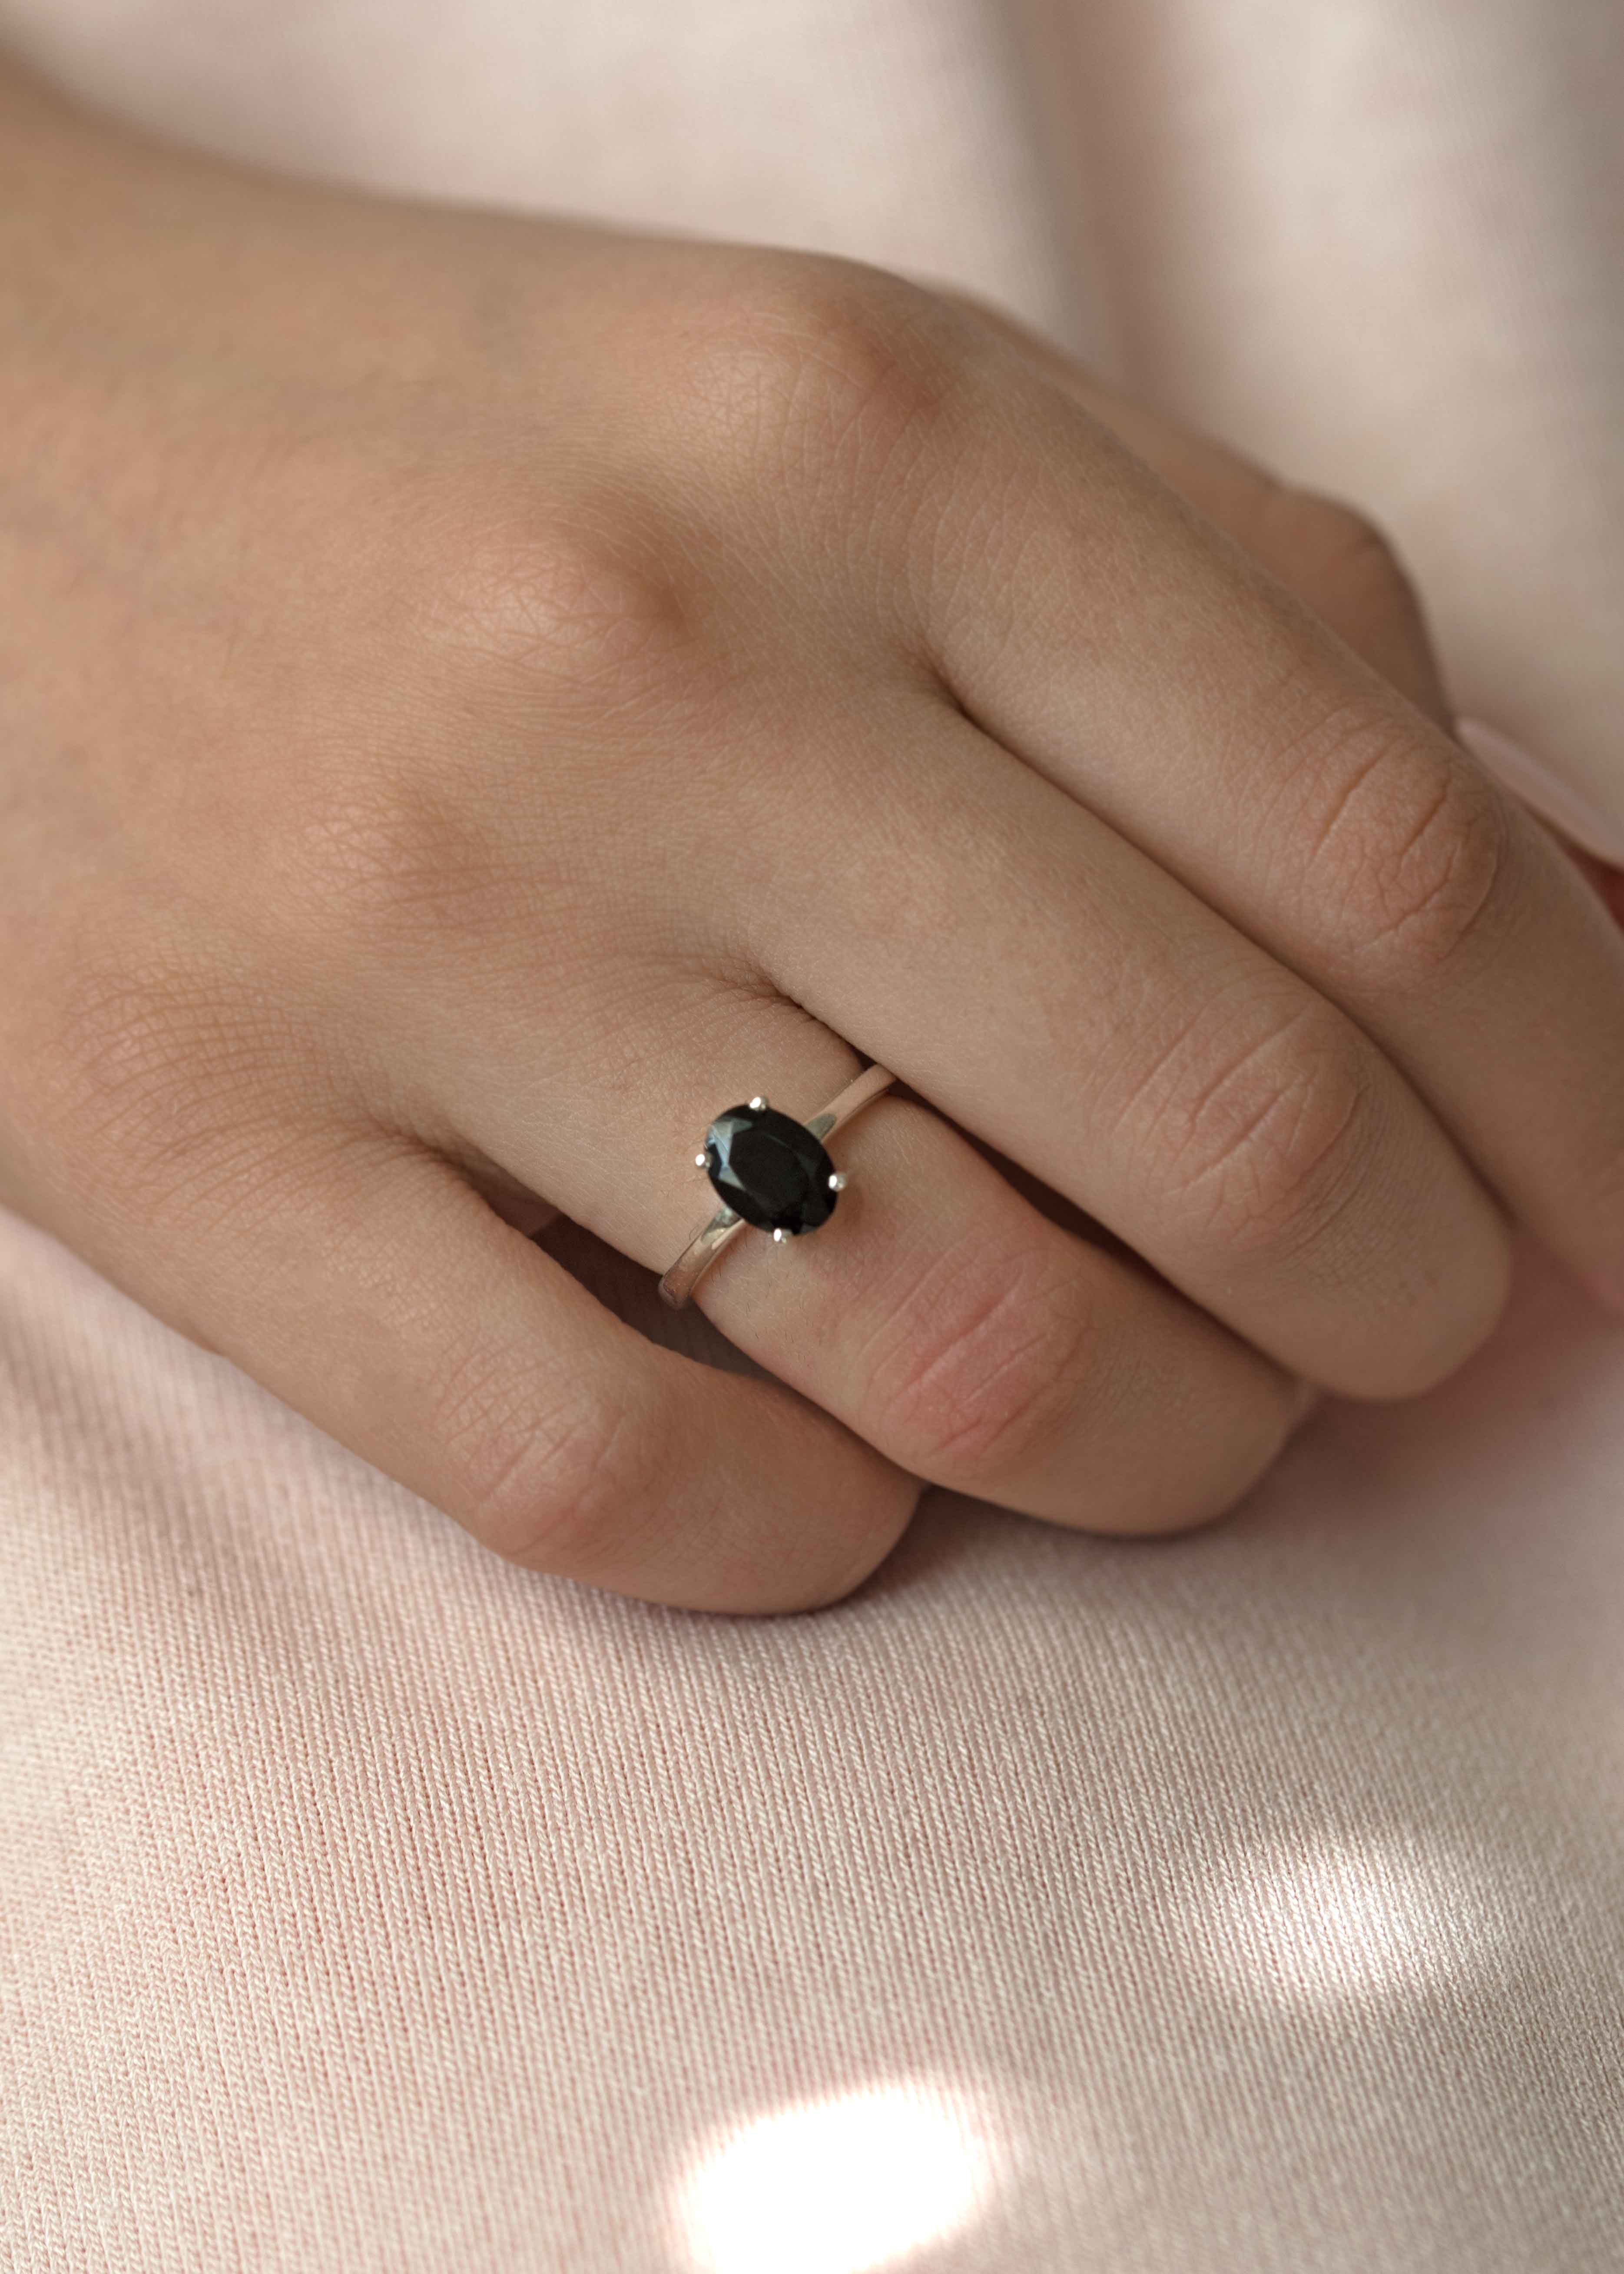 Black Onyx Ring Sterling Silver Protection Stone